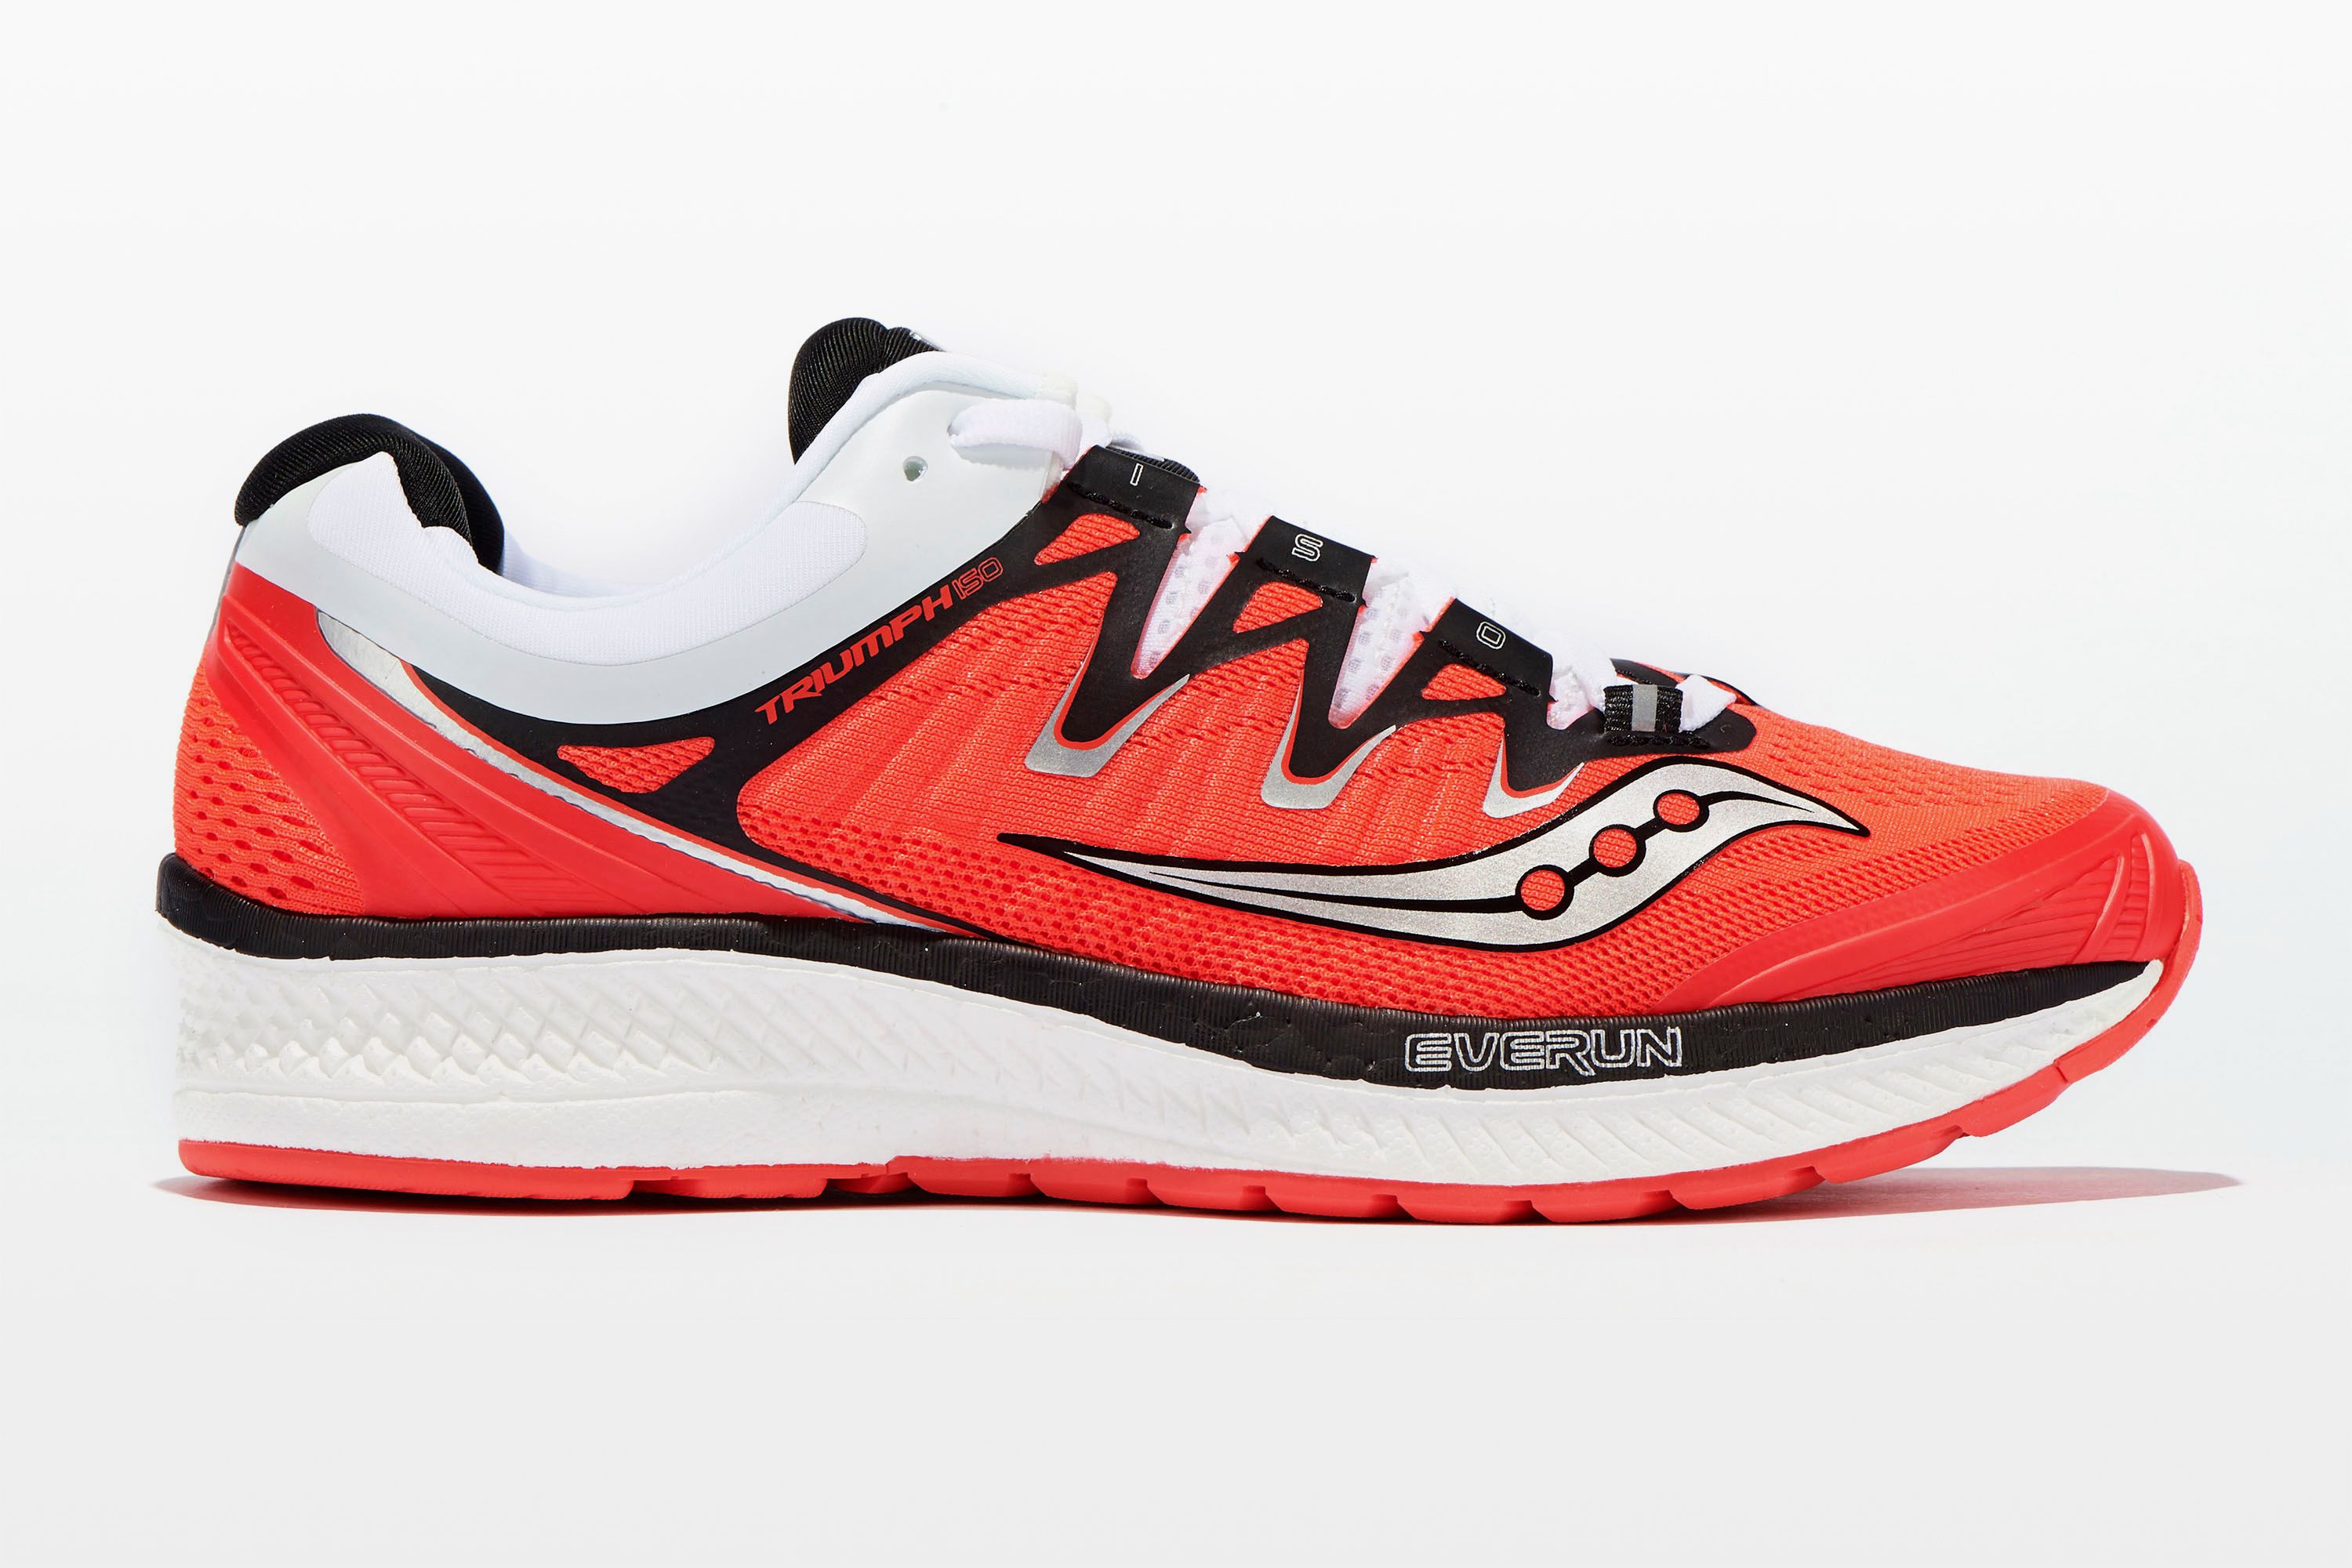 saucony triumph 9 review runner's world